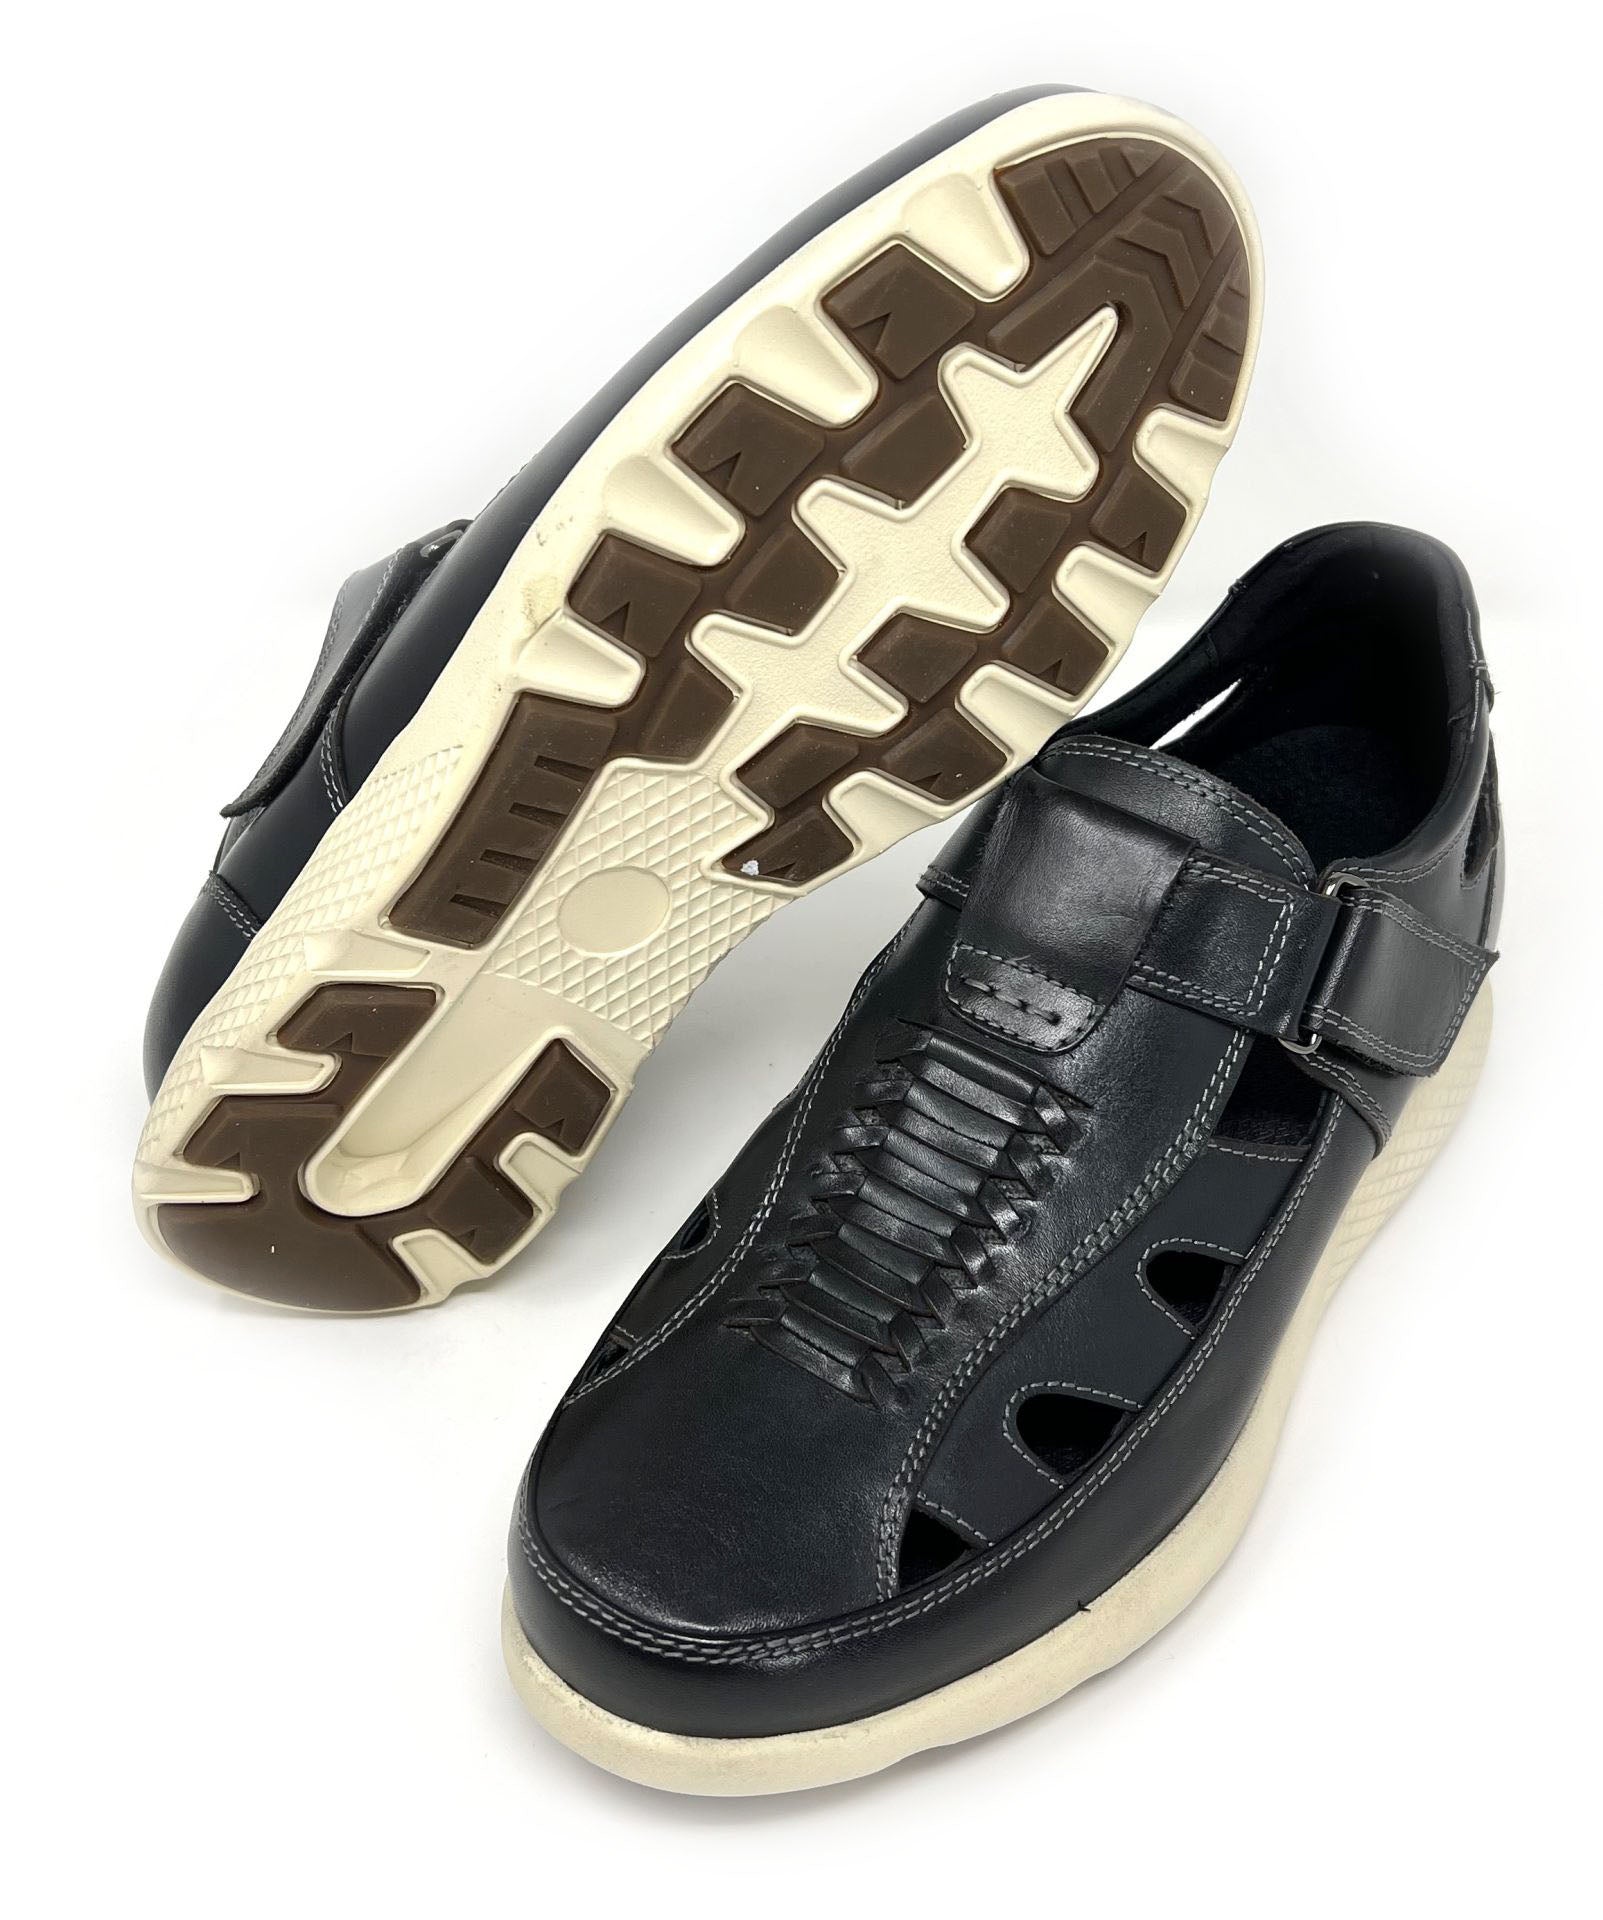 Elevator shoes height increase FSM0049 - 2.4 Inches Taller (Black) - Size 7.5 Only